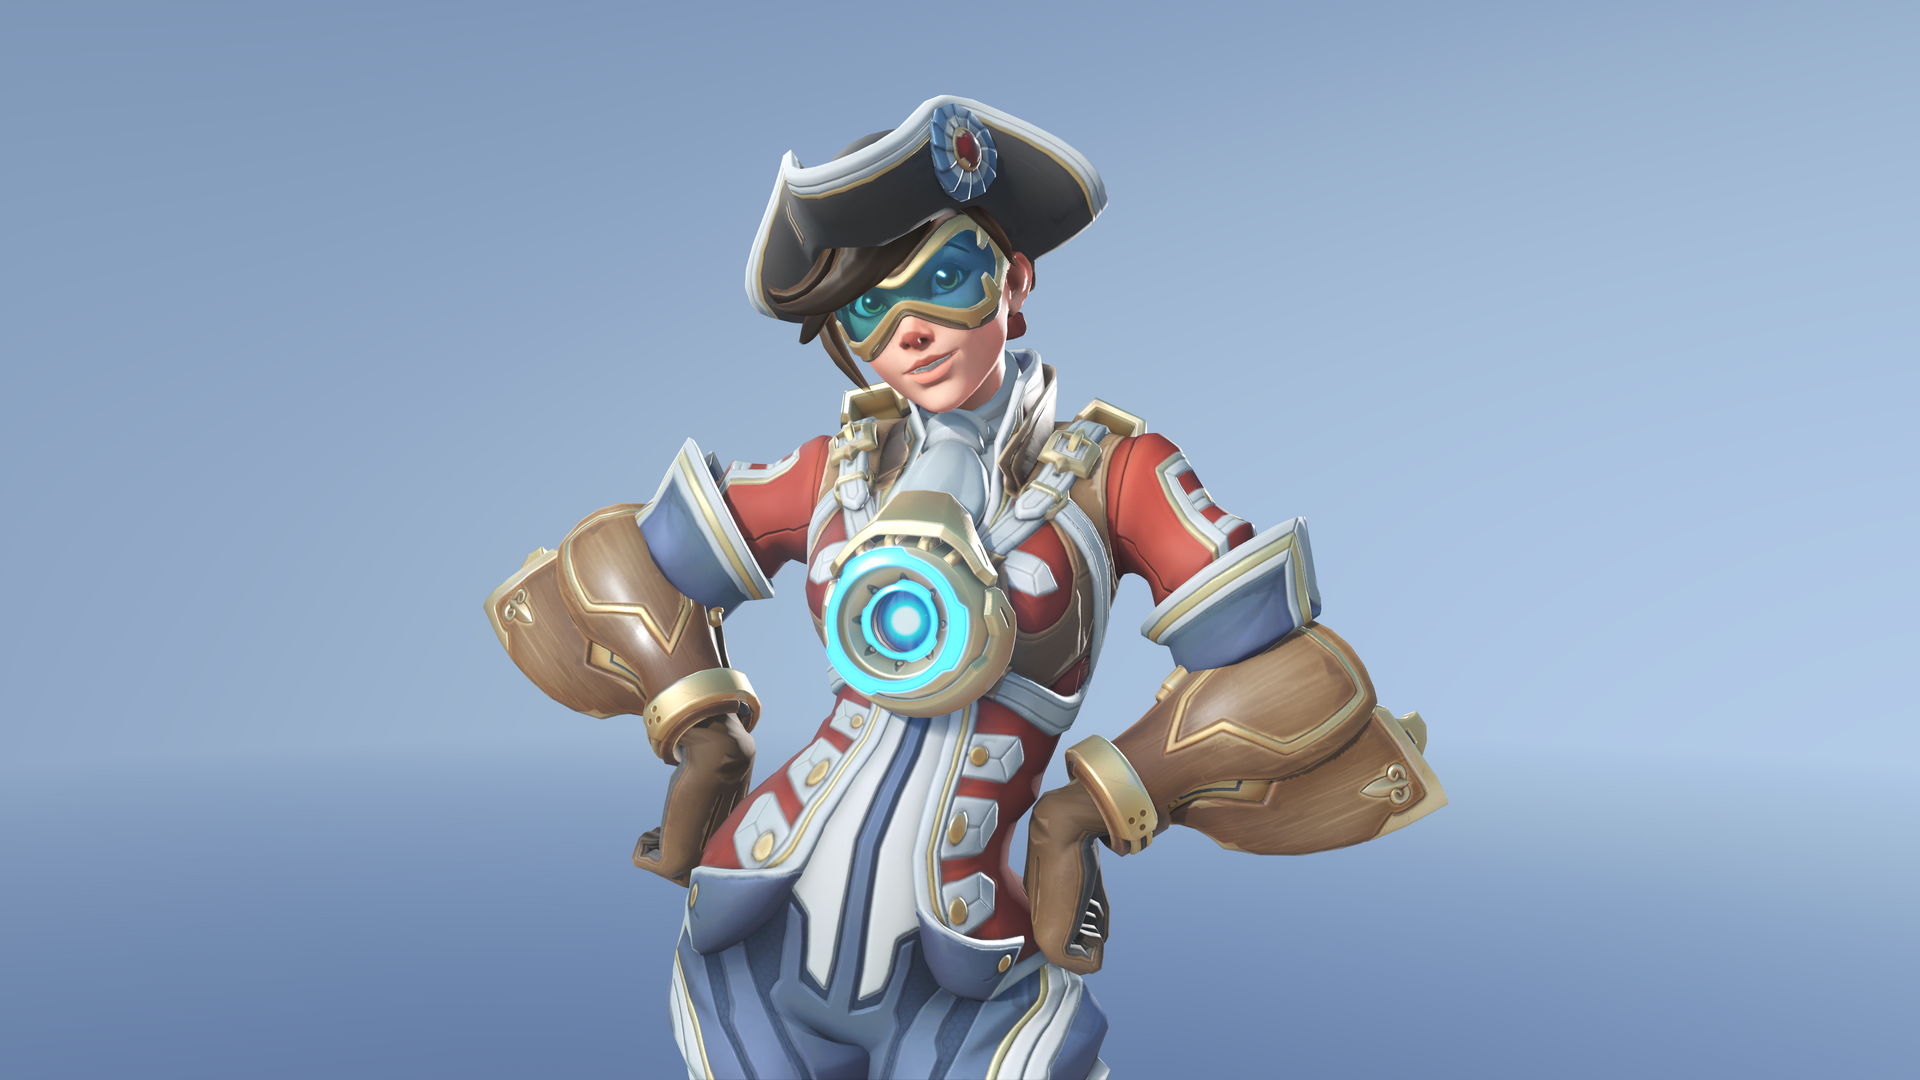 Petition to give Tracers Mythic skin more Customisation options